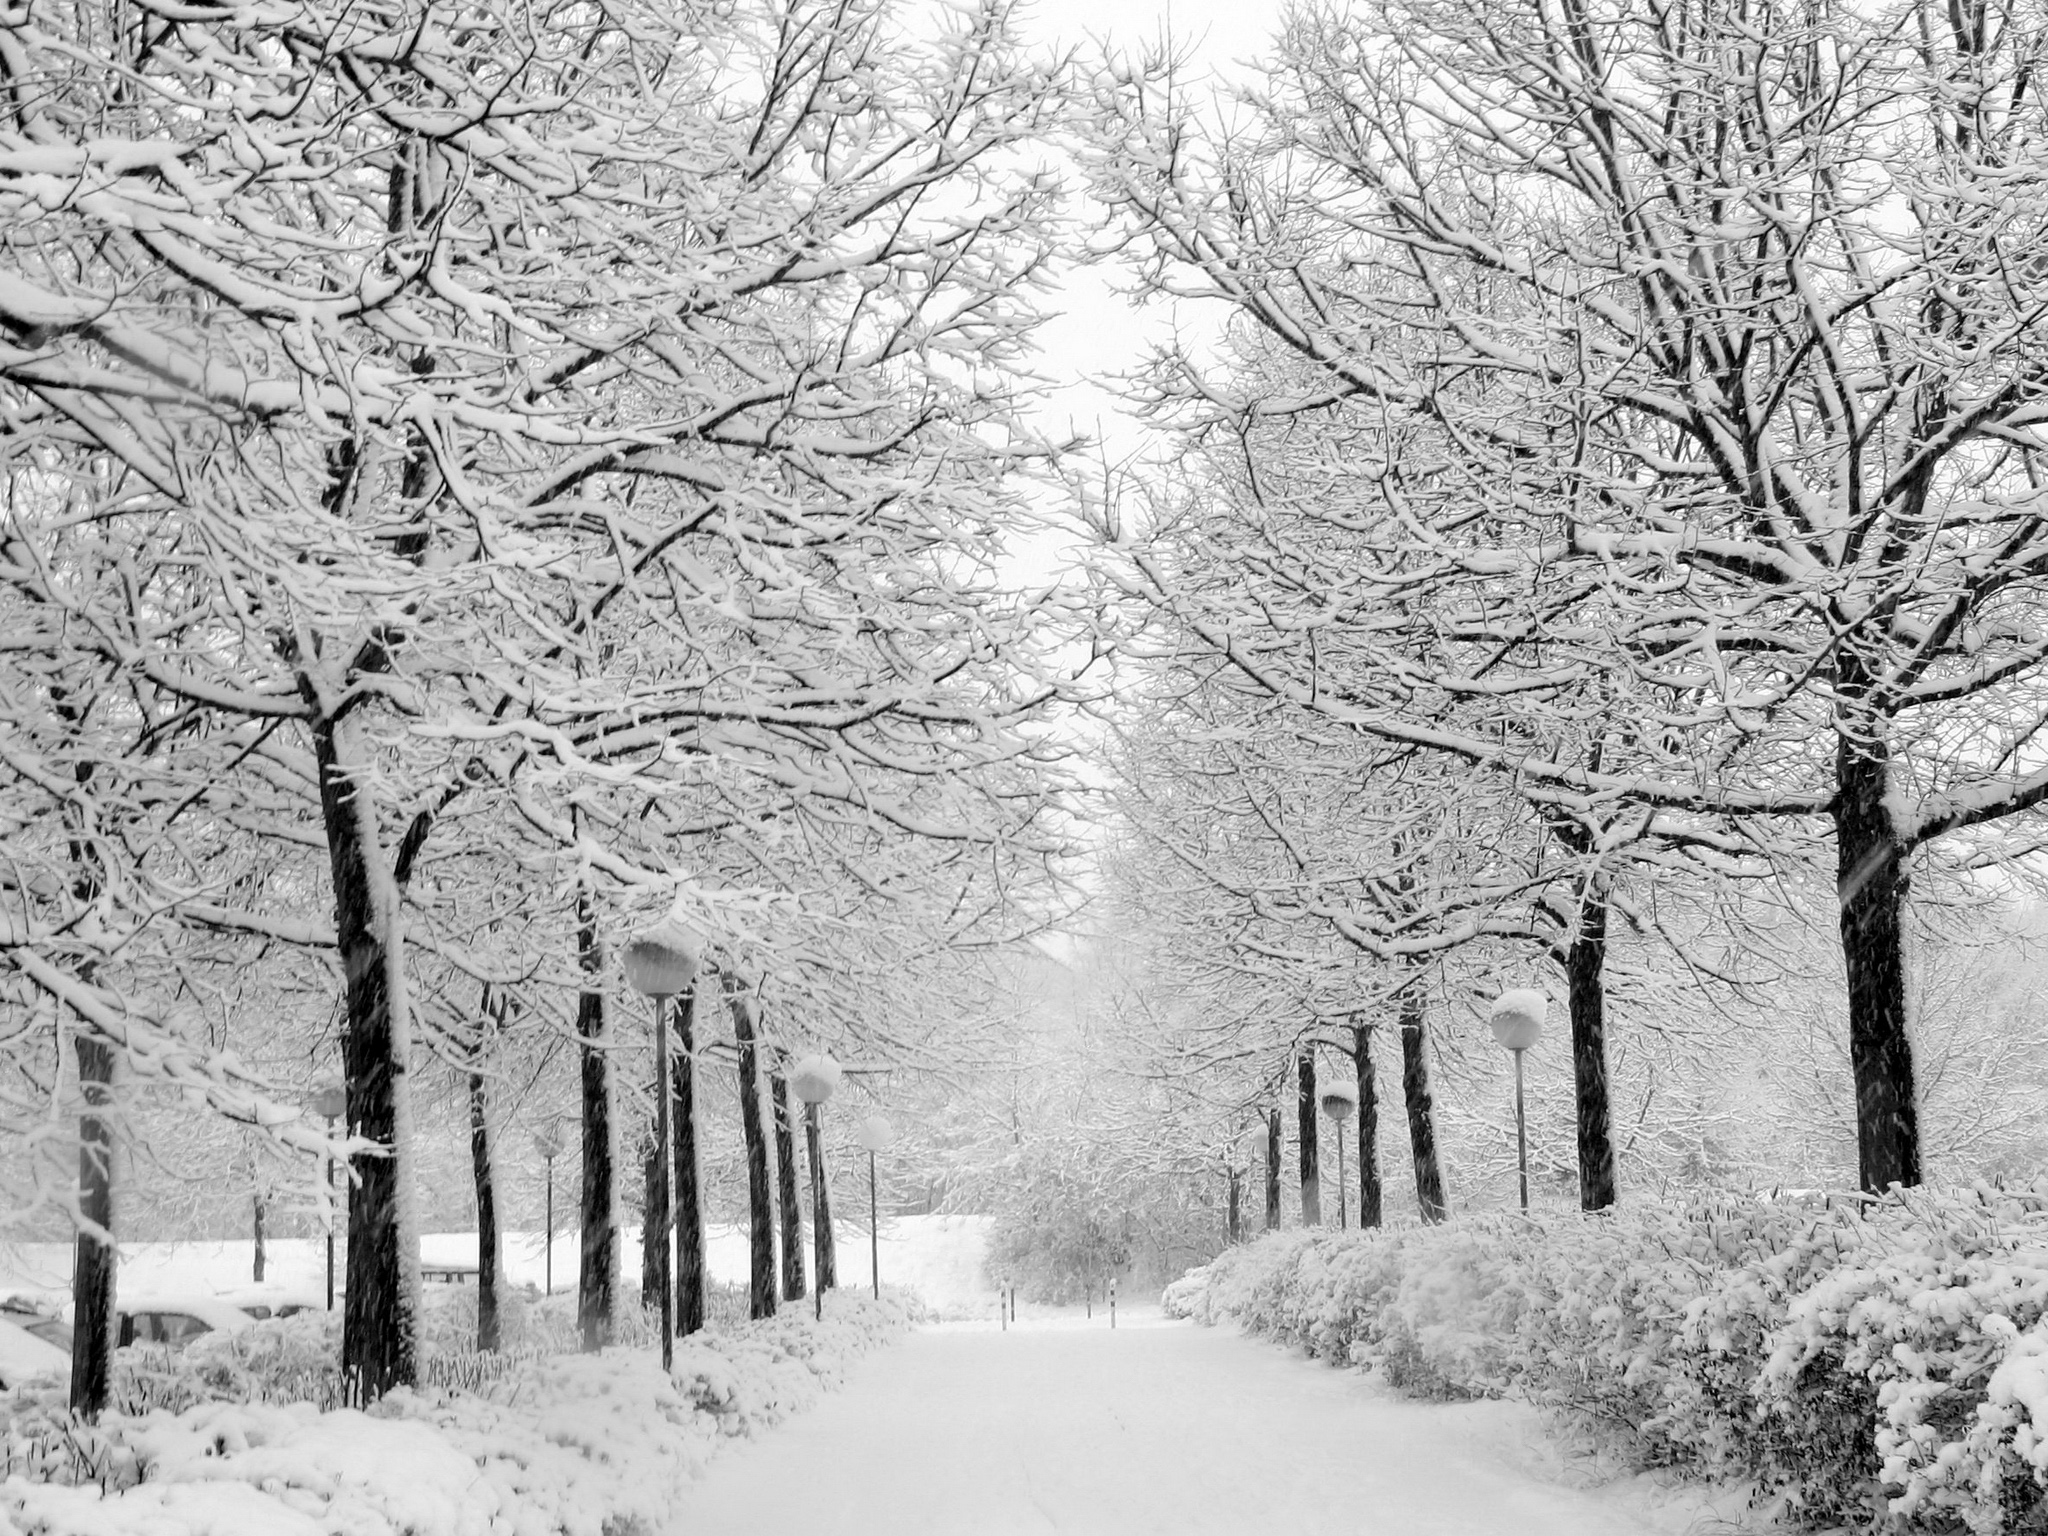 Download High quality Winter wallpaper / Nature / 2048x1536